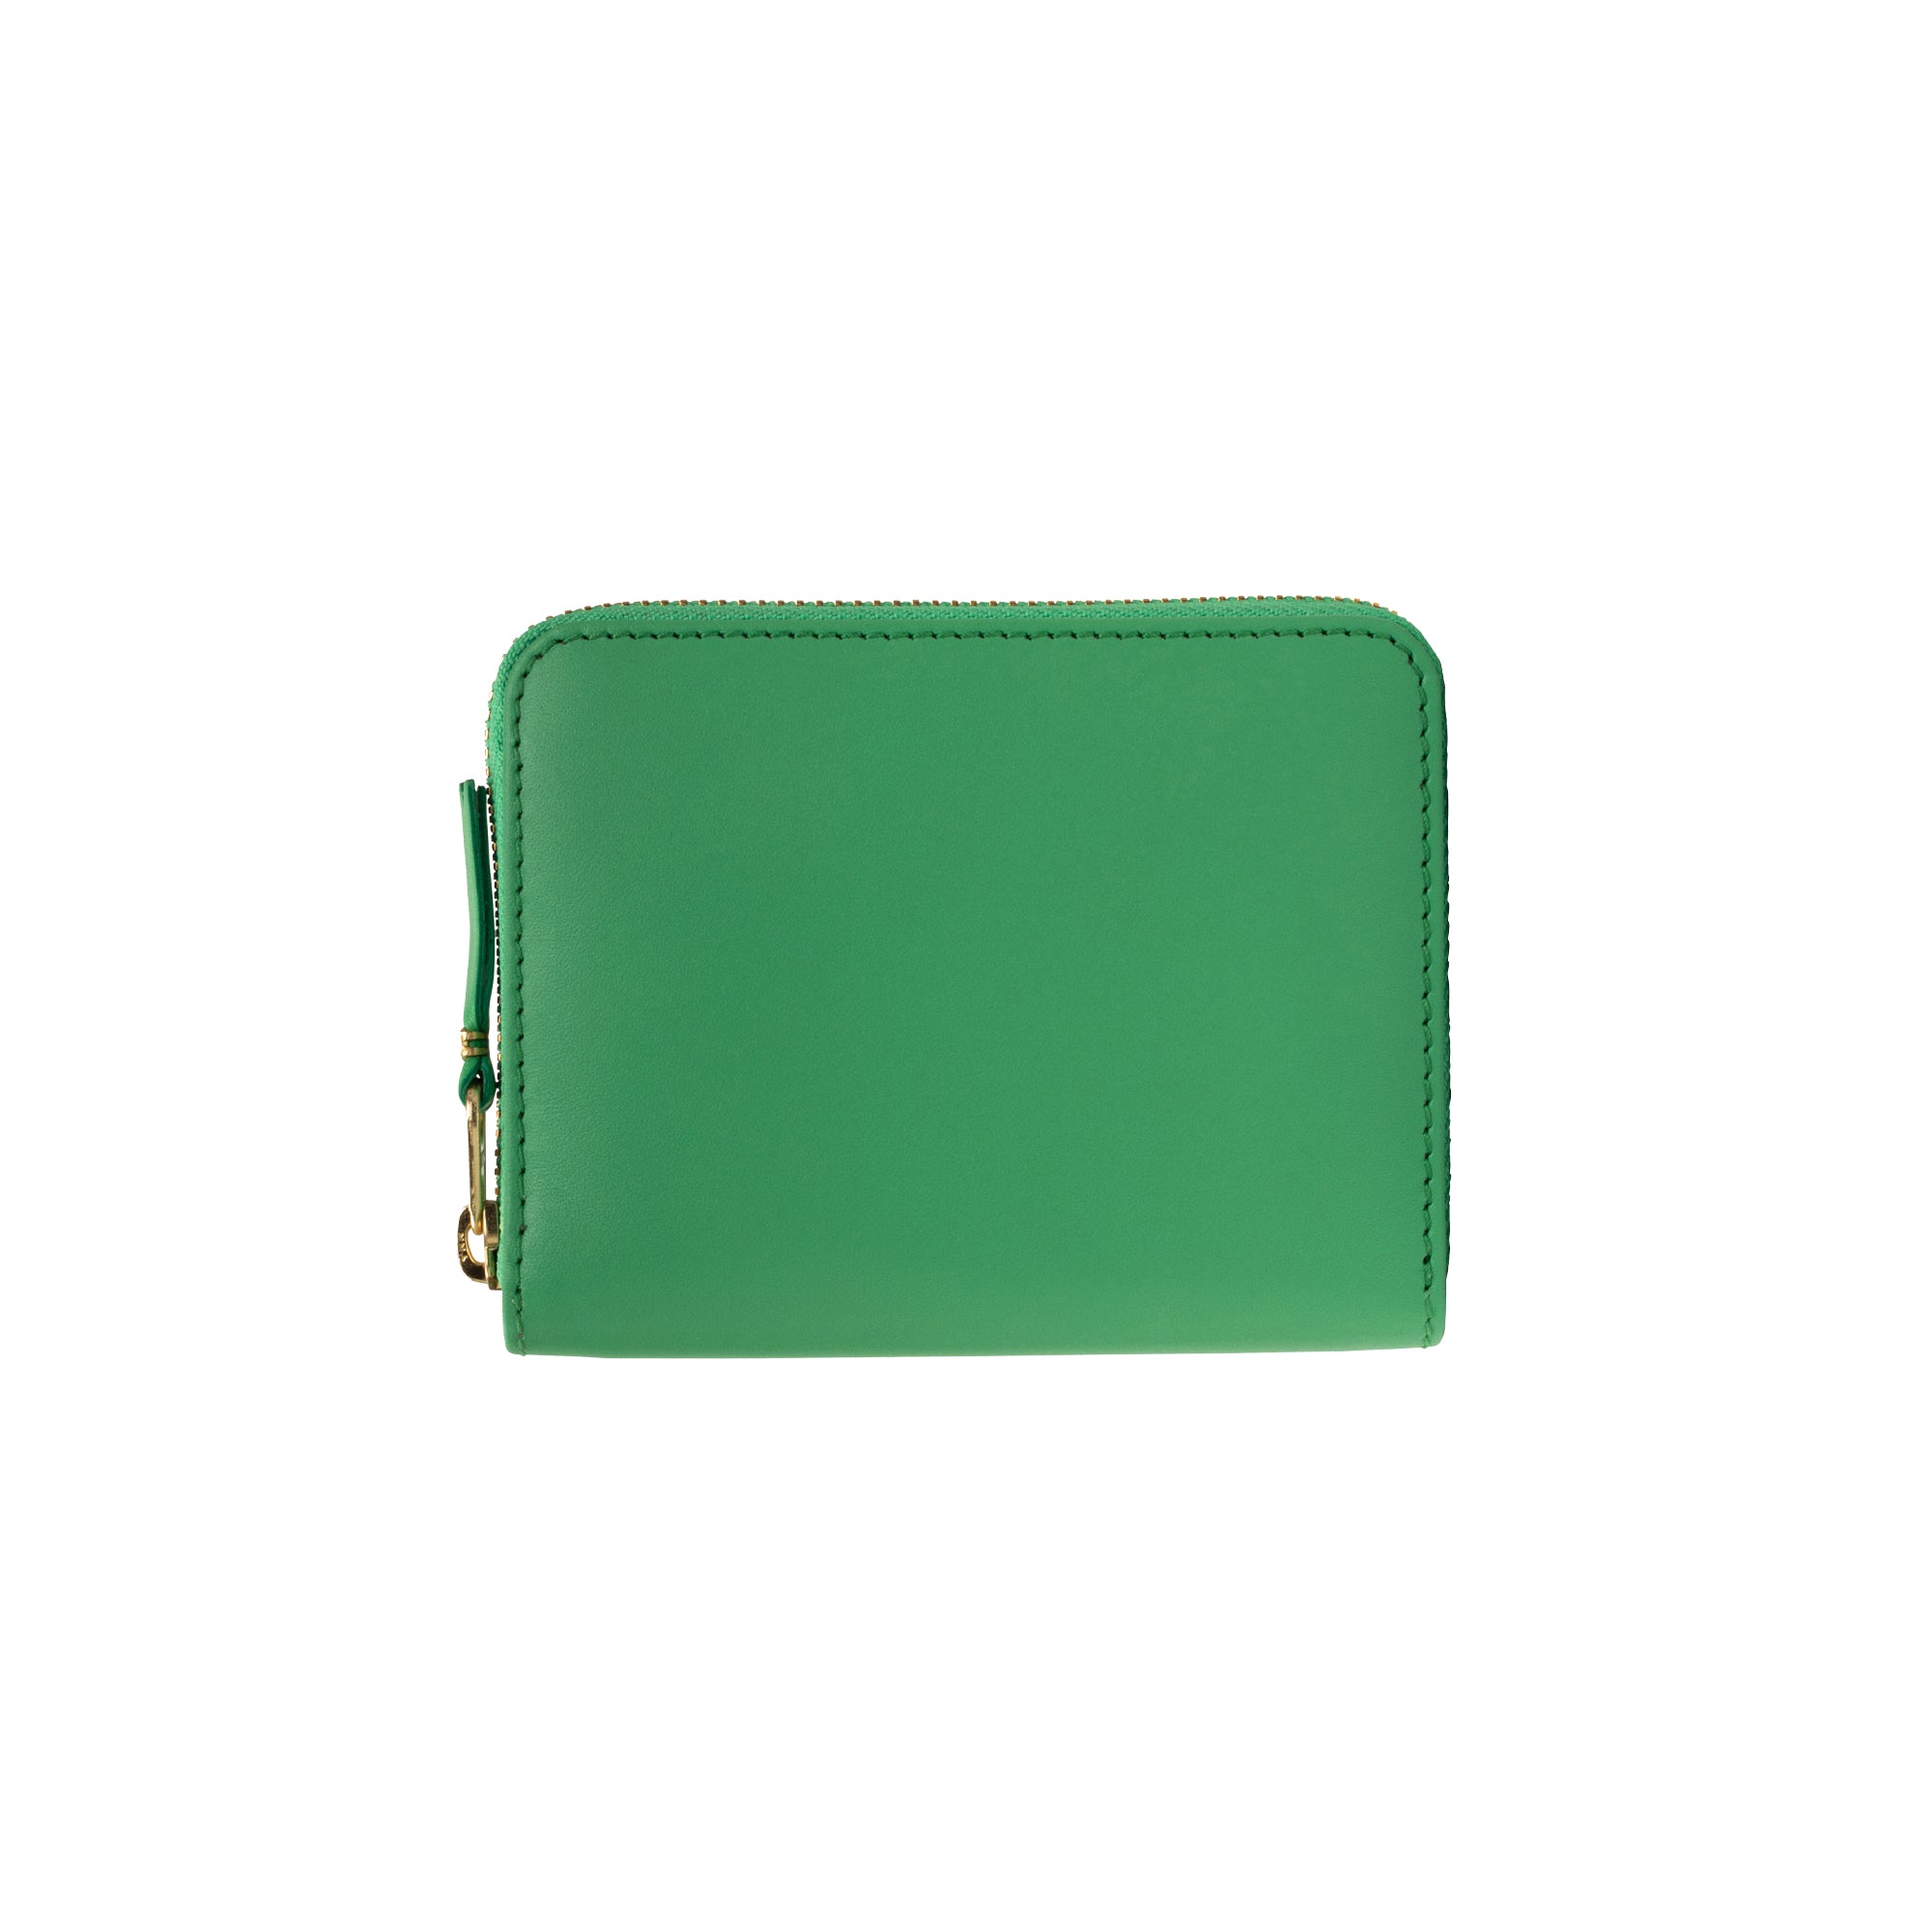 CDG WALLET - Colored Leather Wallet - (SA2110 Green) view 1